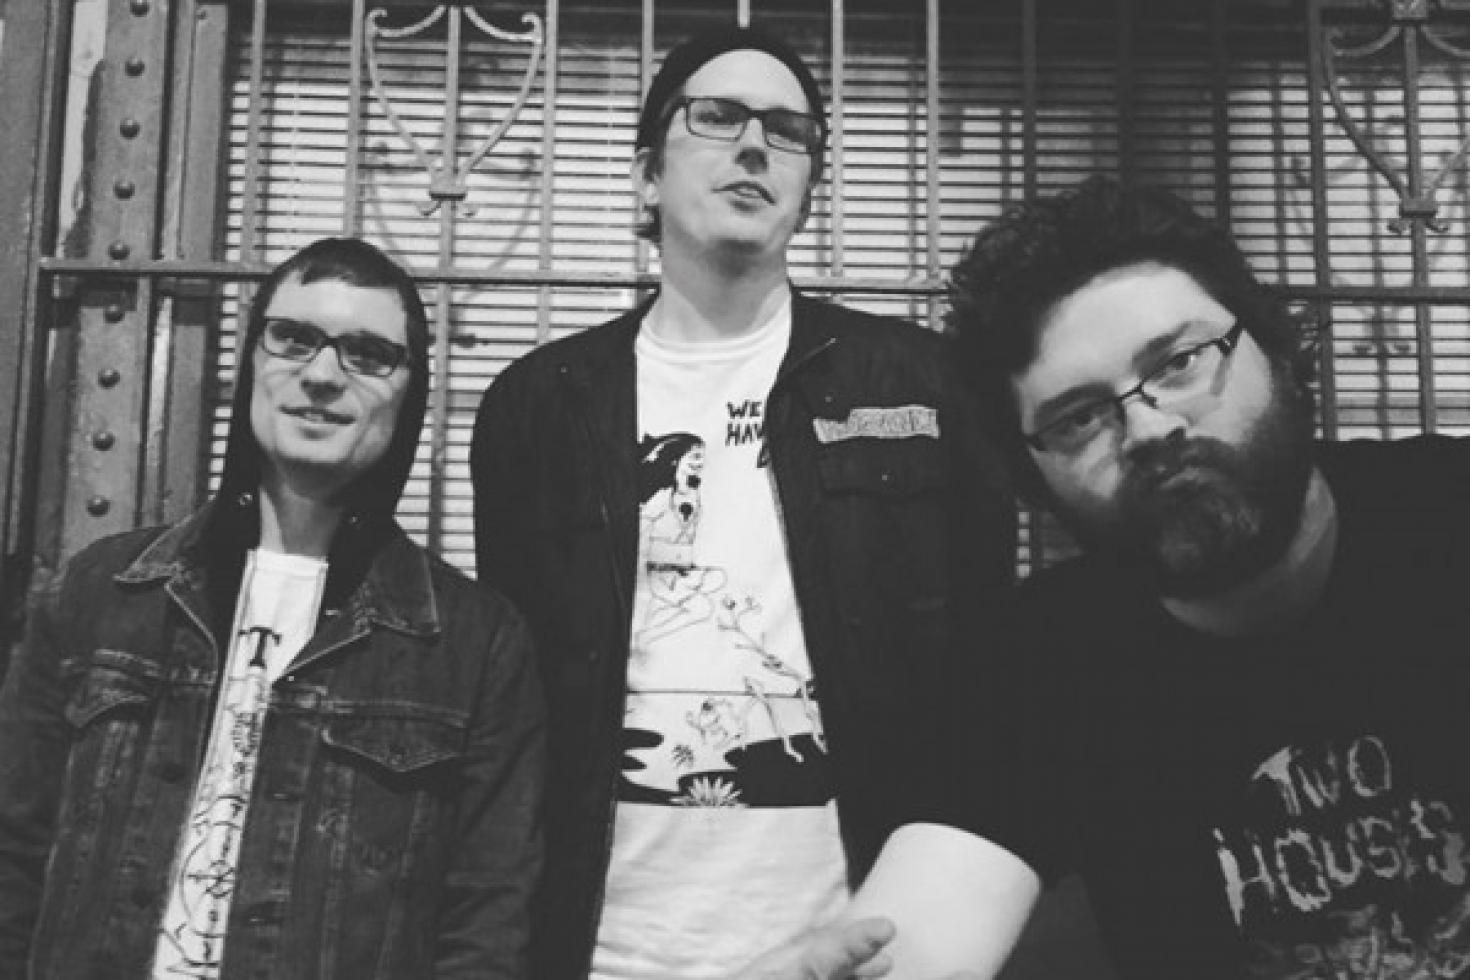 Tightwire release video for 'Six Feet Deep'